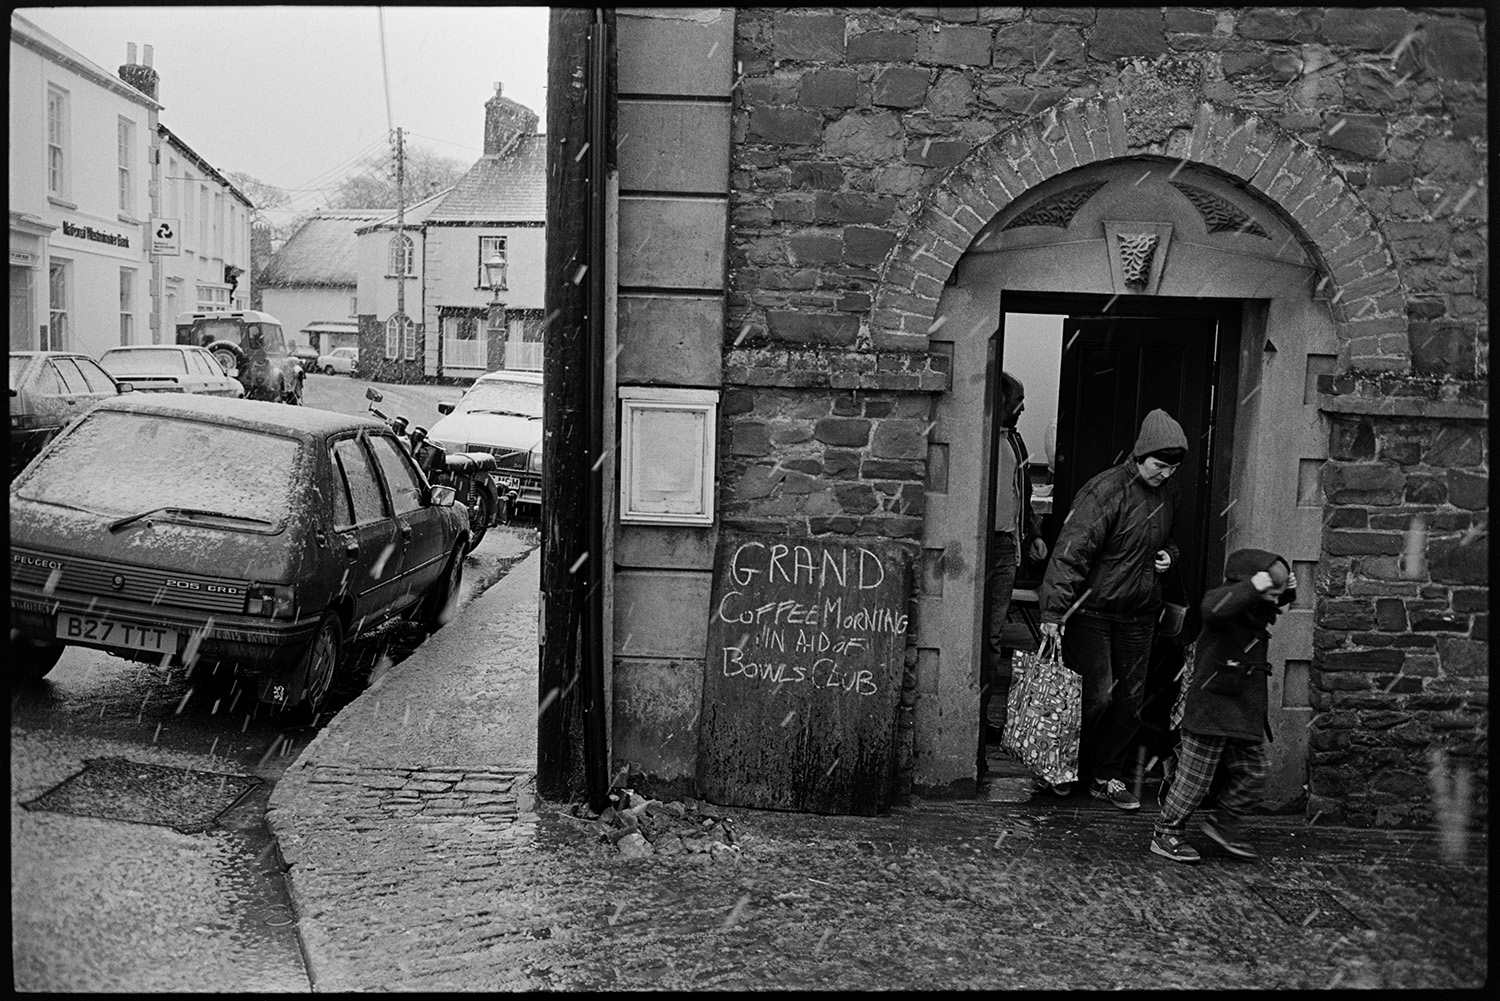 Snow, street scenes with people coming out of coffee morning. 
[A woman and child leaving a coffee morning and coming out from a building onto a cobbled street in Chulmleigh. It is snowing and the snow can be seen settling on parked cars in the adjacent street. The coffee morning was held to raise money for the Bowls Club.]